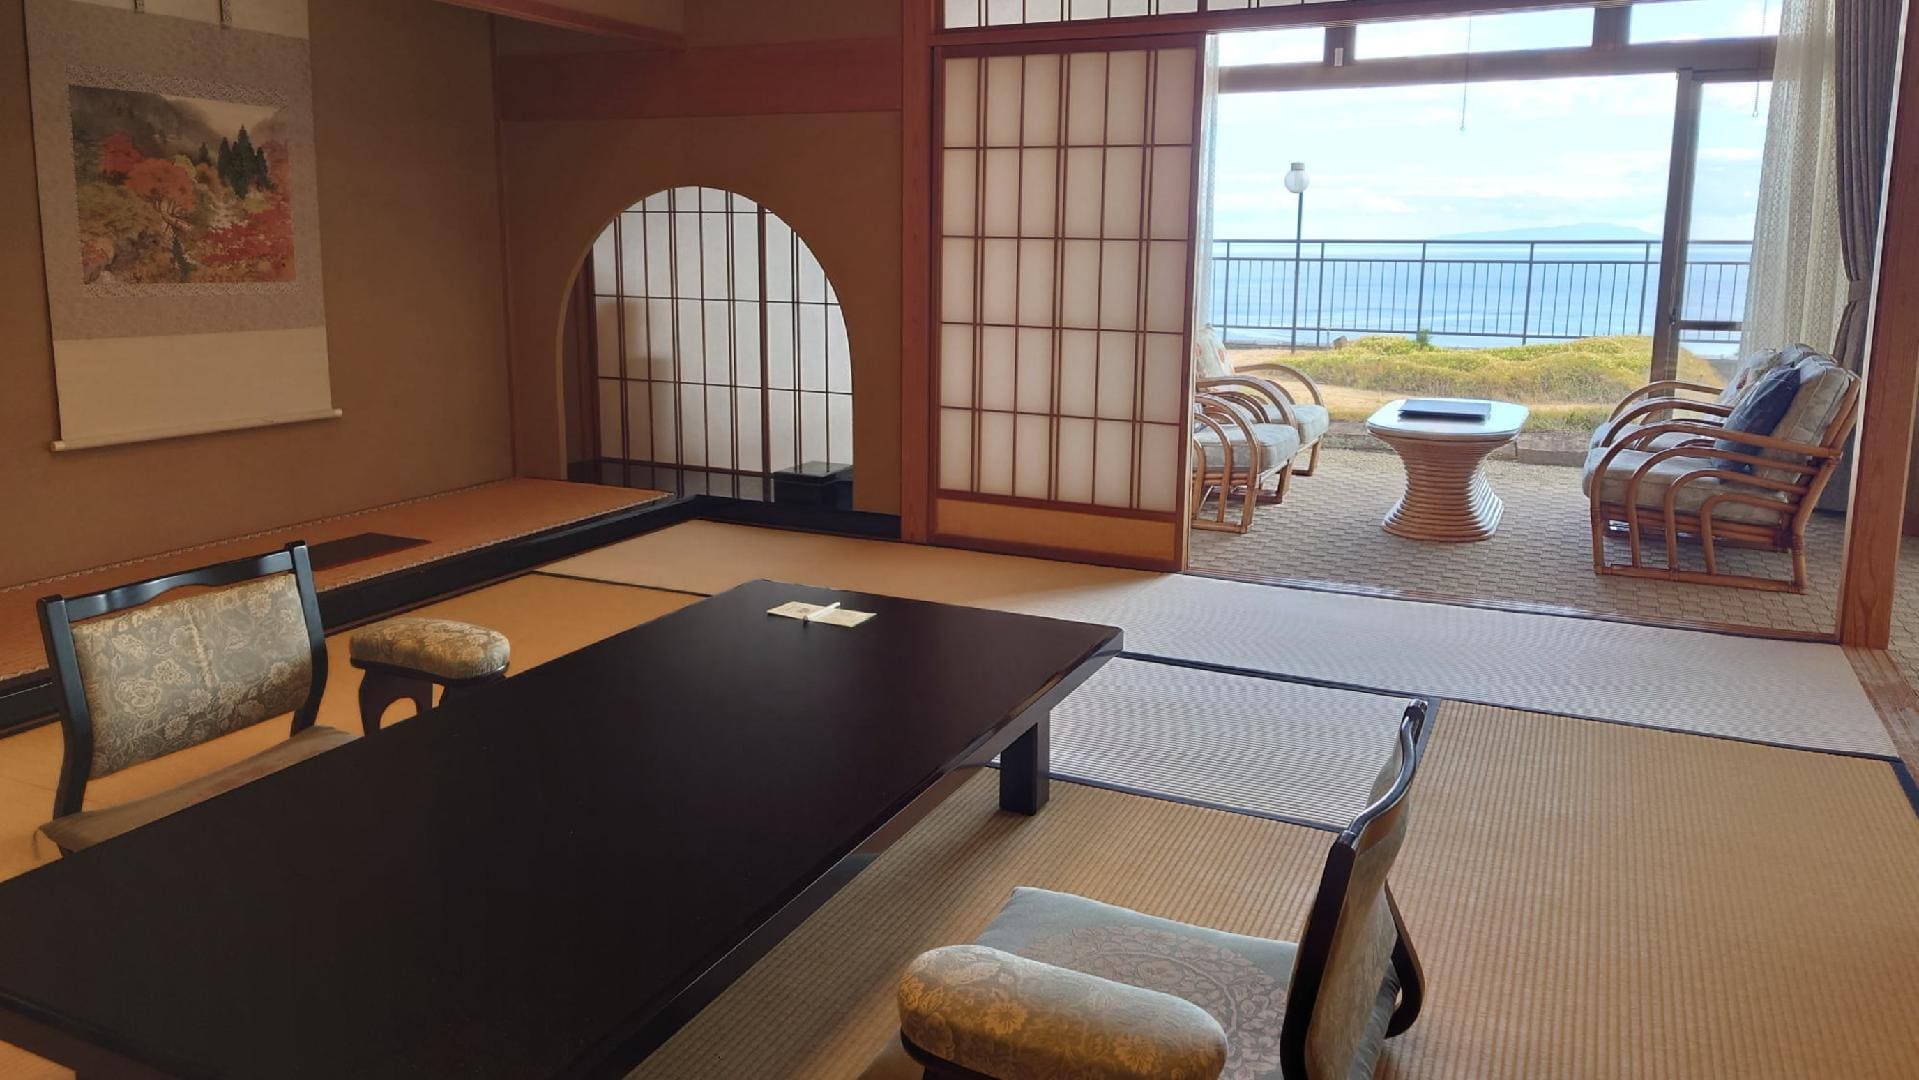 [Example of special room] Special room on the top floor overlooking Sagami Bay